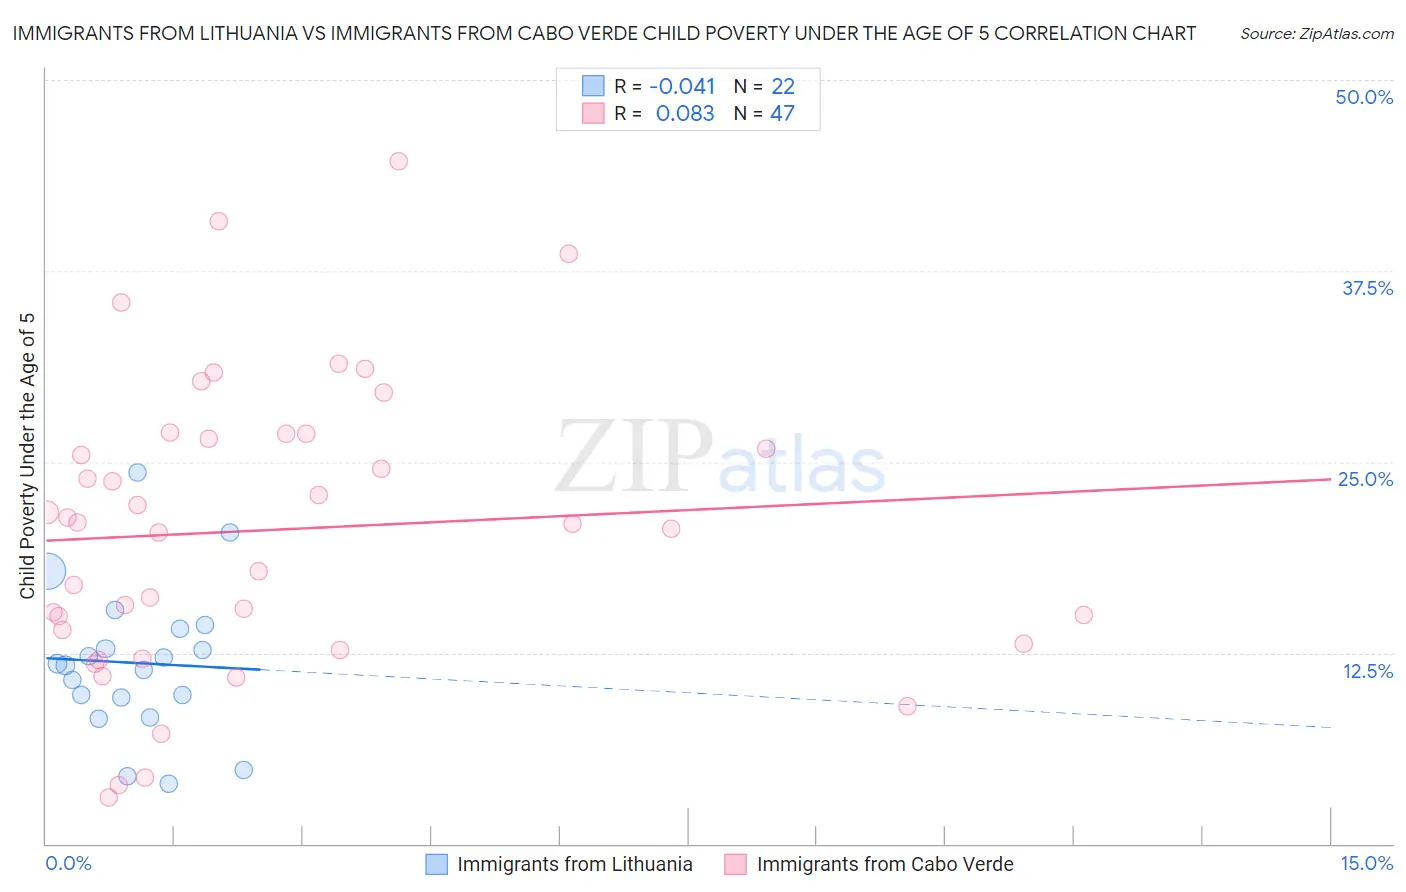 Immigrants from Lithuania vs Immigrants from Cabo Verde Child Poverty Under the Age of 5